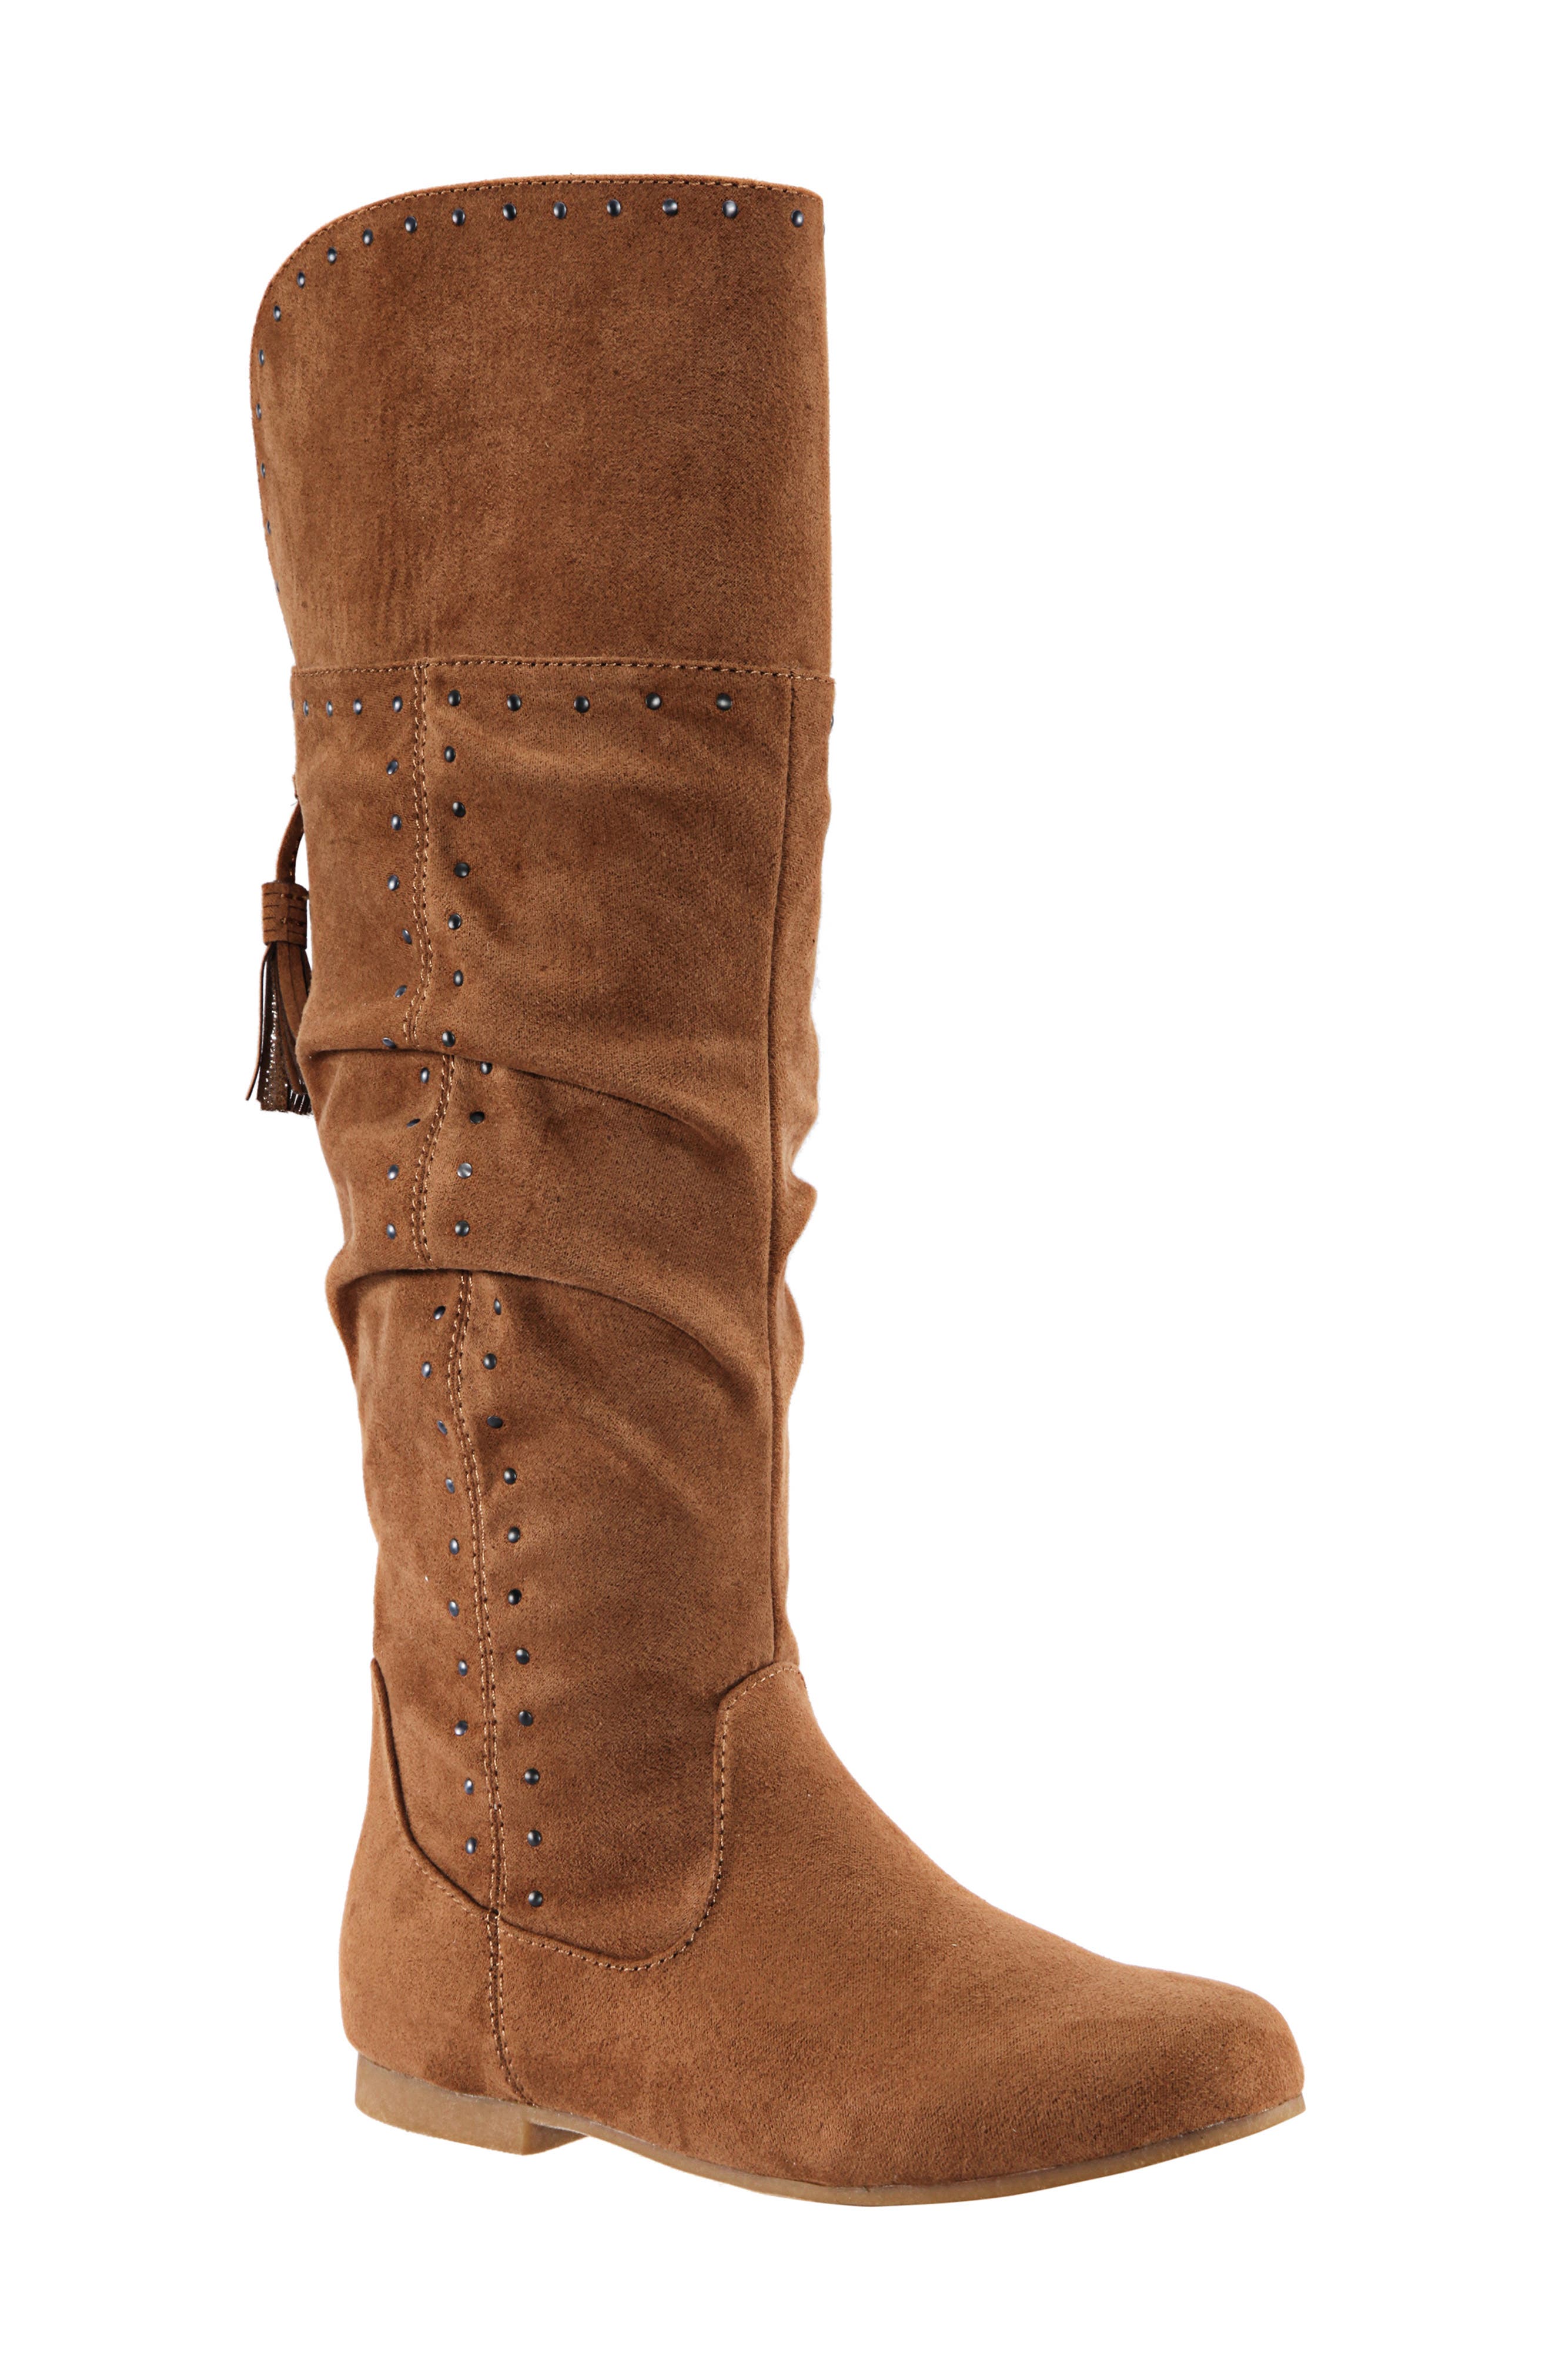 UPC 794378366928 product image for Girl's Nina Gem Slouchy Studded Boot, Size 2 M - Brown | upcitemdb.com